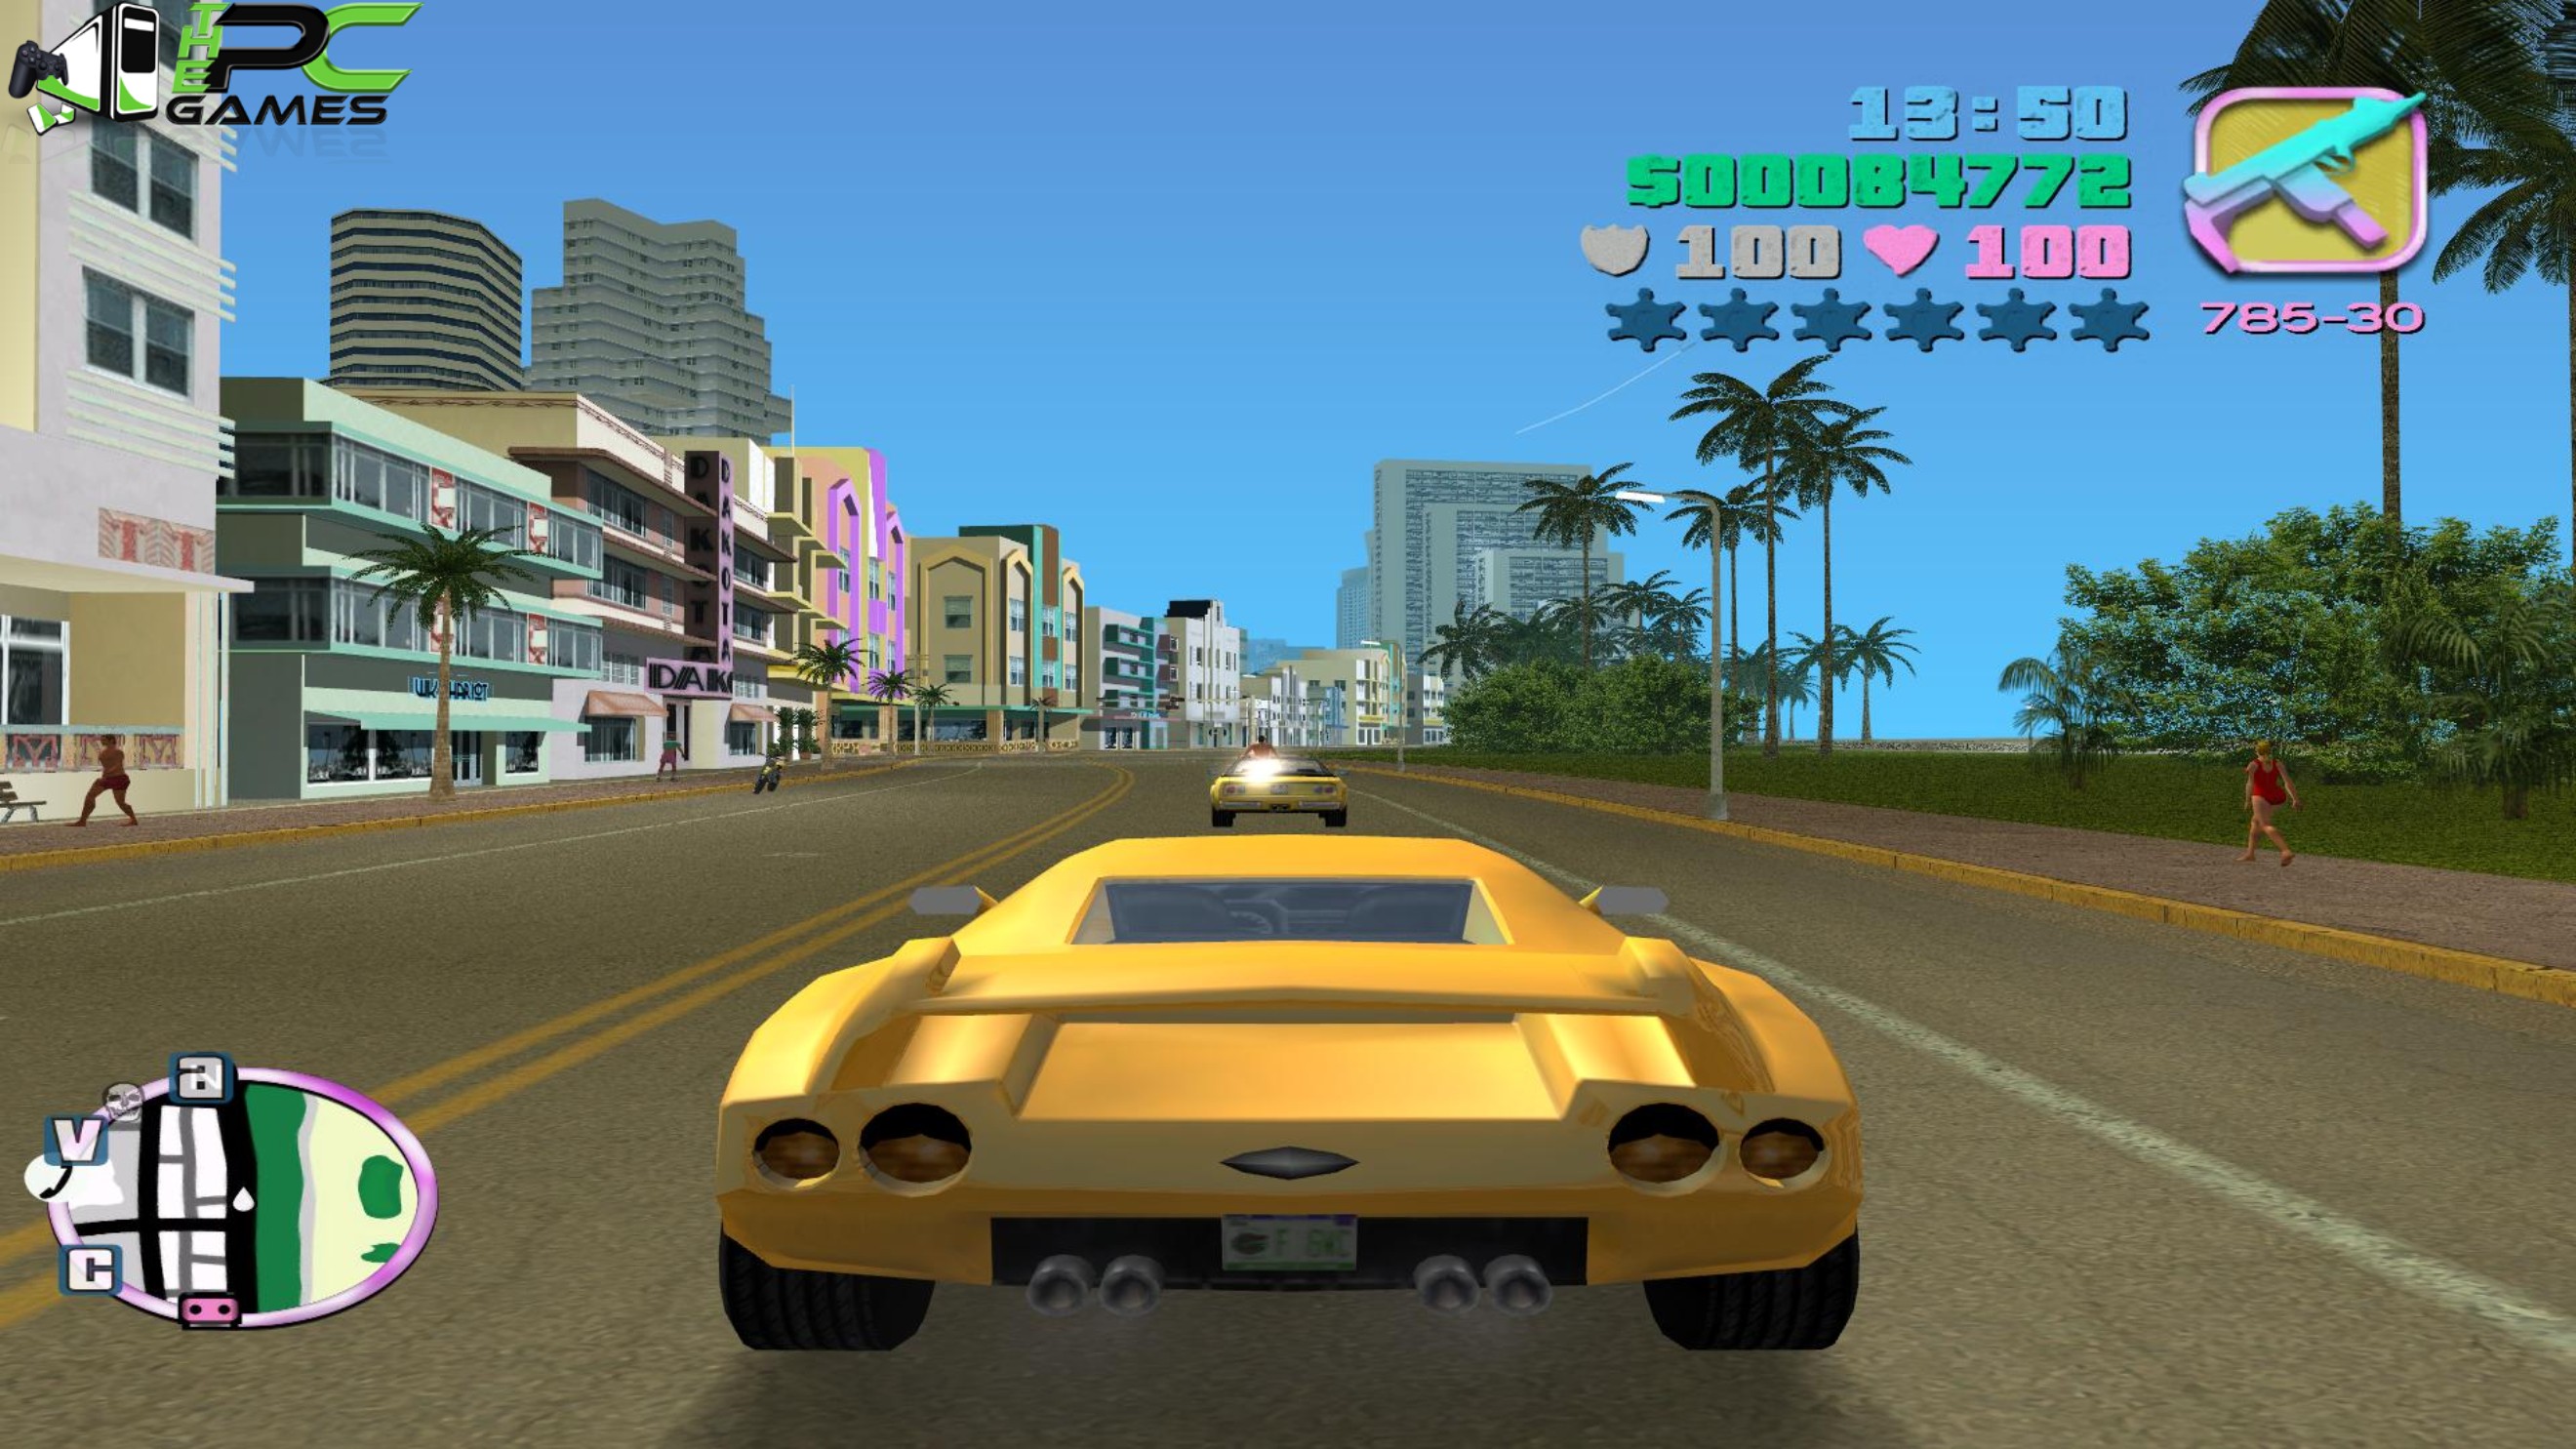 gta vice city license key free download for pc